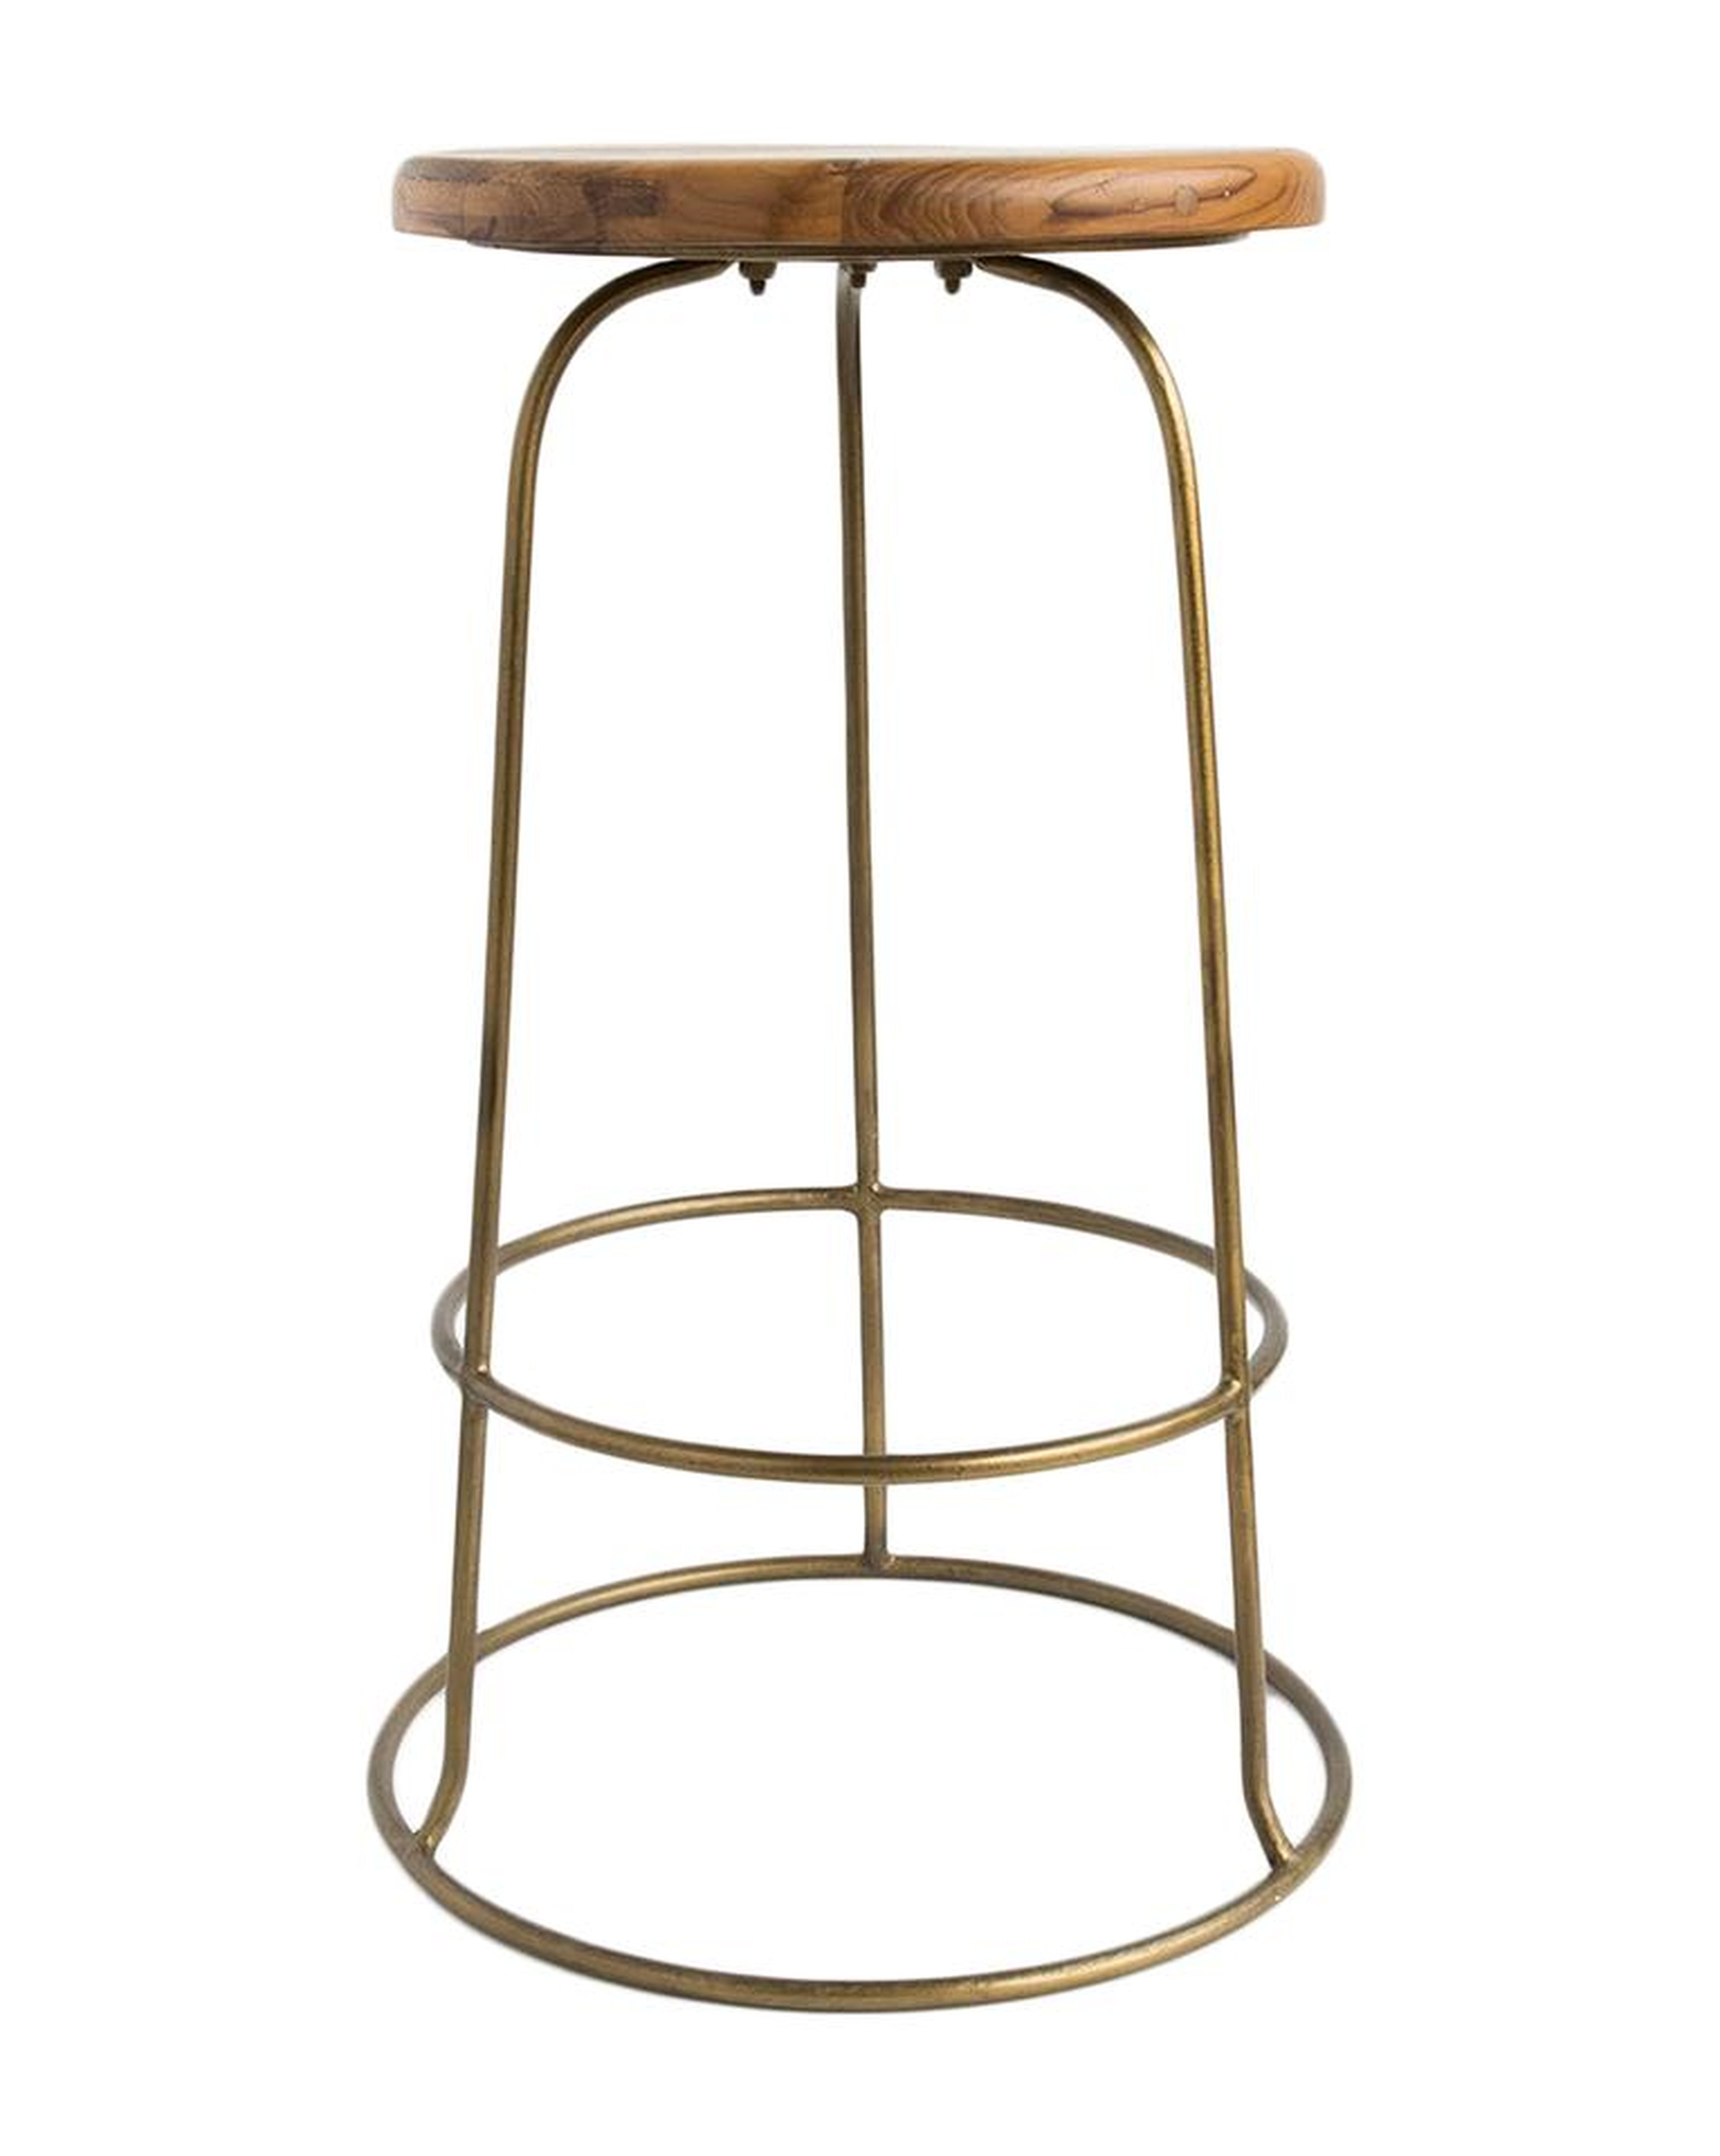 WALTZ COUNTER STOOL - McGee & Co.